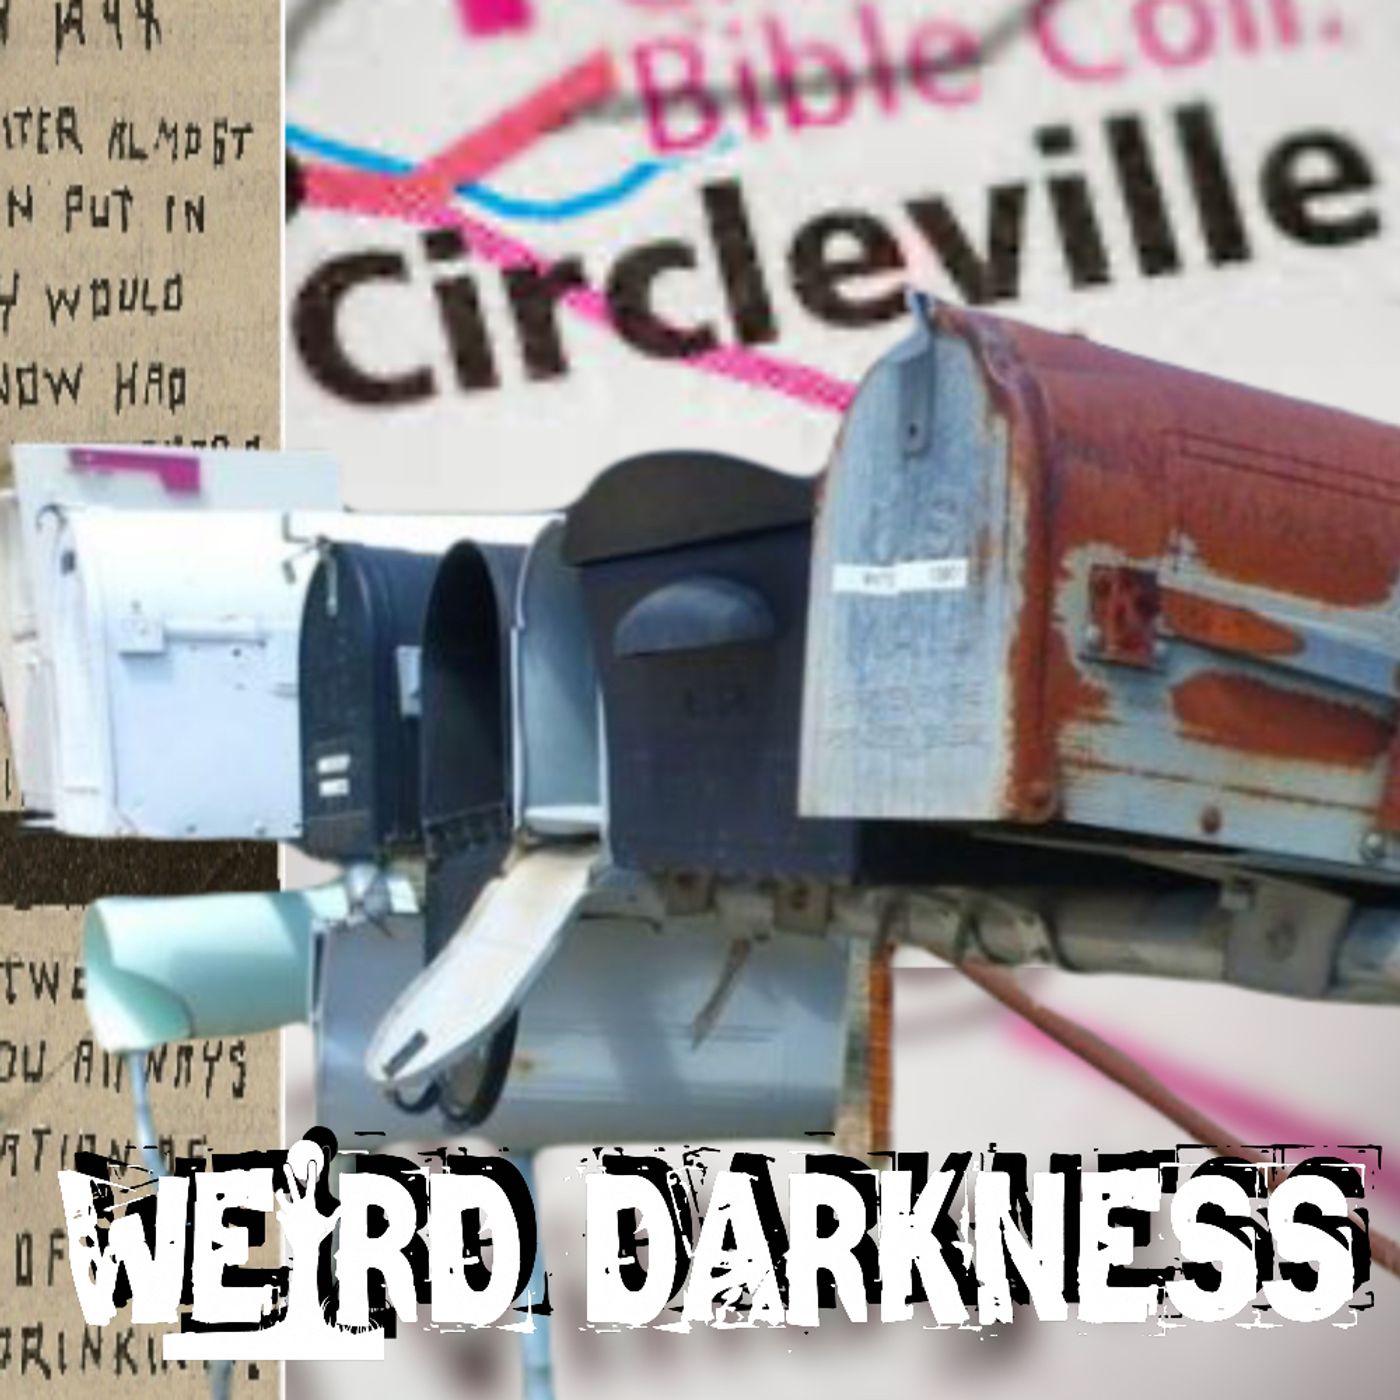 “The CIRCLEVILLE LETTERS and WESTFIELD WATCHER” True Psychological Horrors! #WeirdDarkness #Darkives